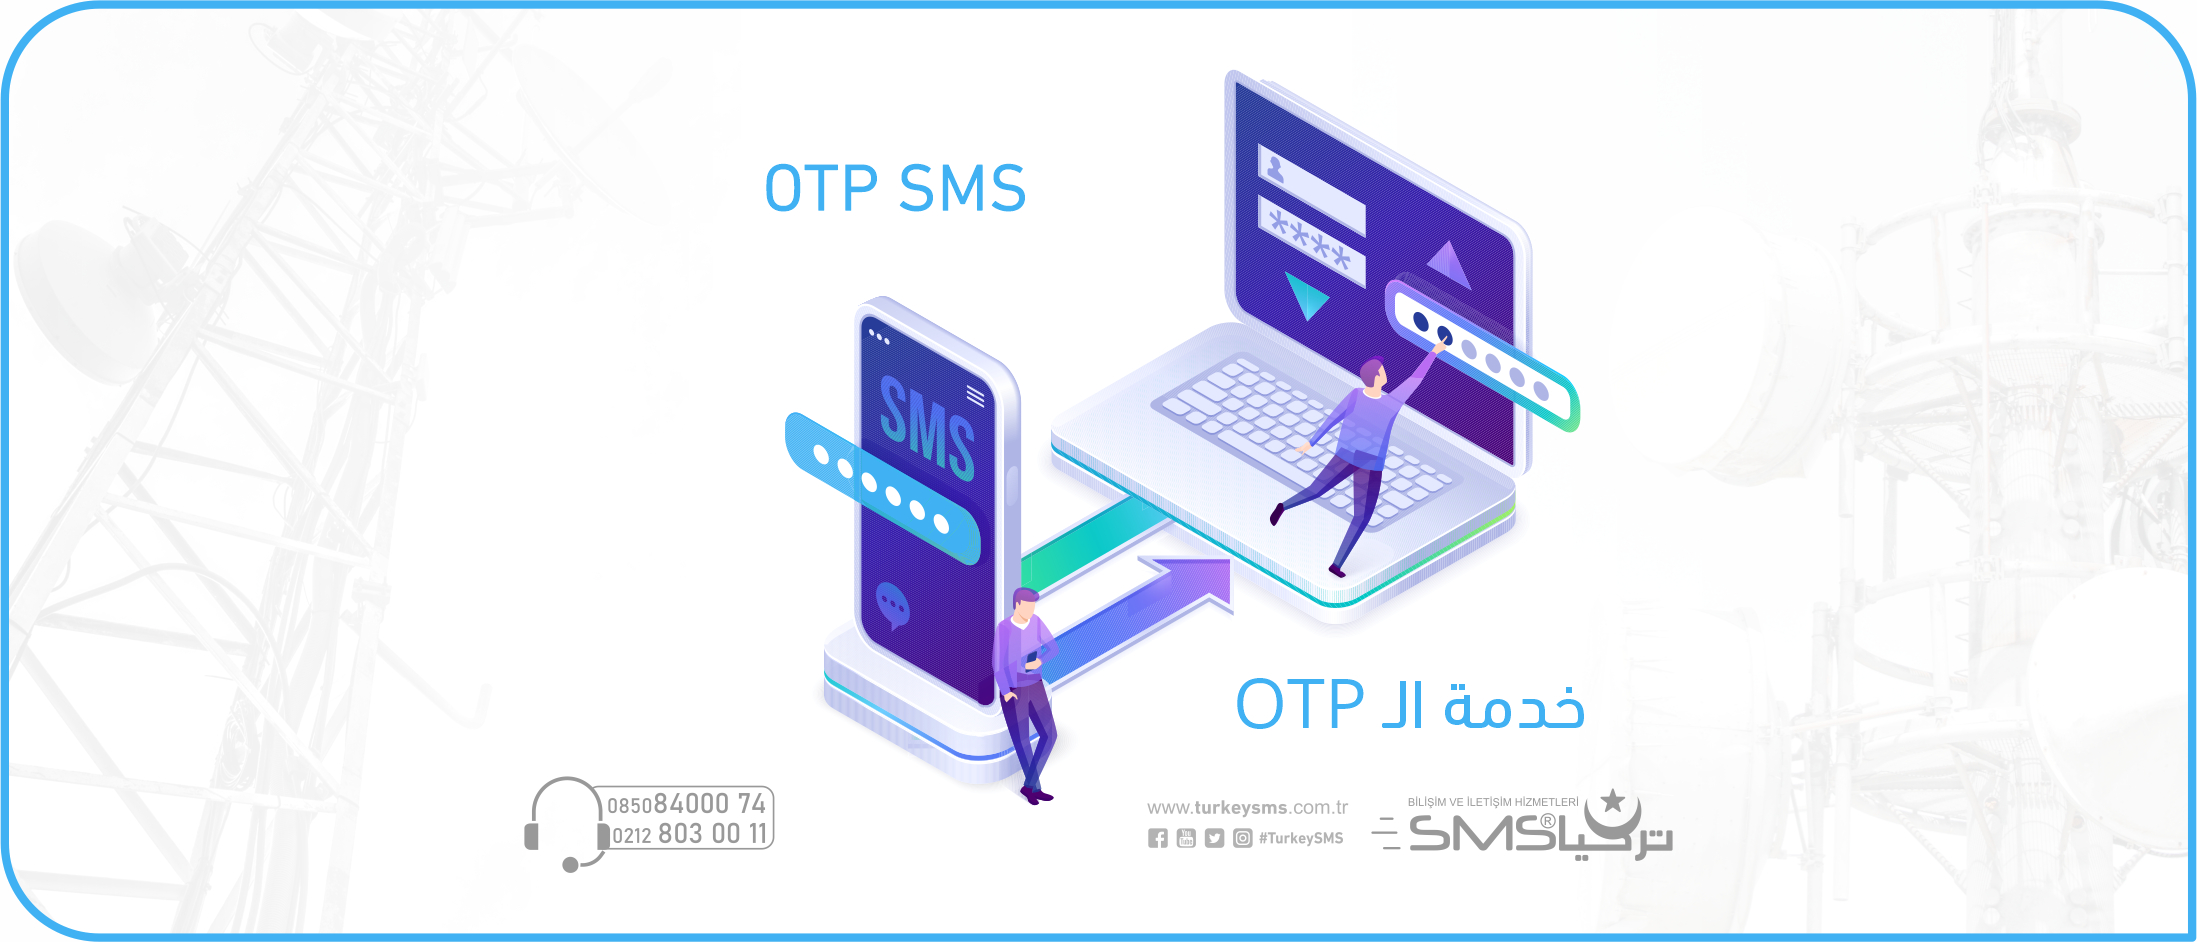 One-Time Password OTP SMS